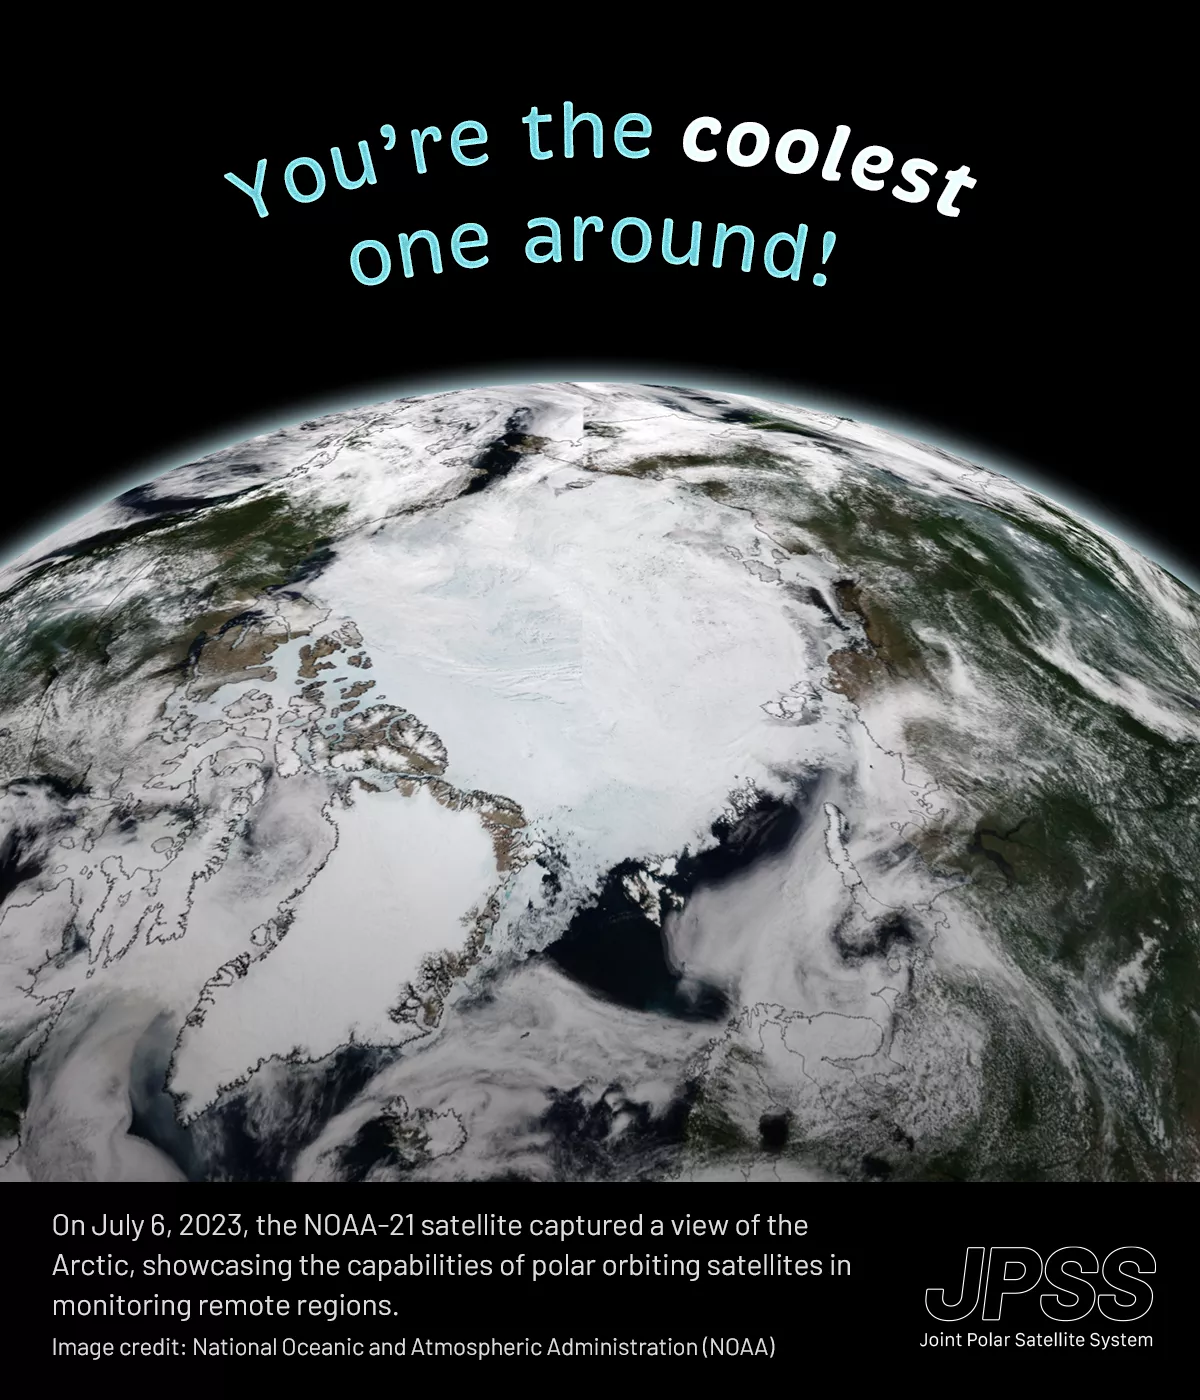 A Valentine's Day card with a satellite image of the Arctic as the backdrop. At the top of the card, a whimsical message in curvy, light blue font reads “You're the coolest one around!” with the word “coolest” emphasized in bold white. Below the image, a caption reads, “On July 6, 2023, the NOAA-21 satellite captured a view of the Arctic, showcasing the capabilities of polar orbiting satellites in monitoring remote regions. Image credit: National Oceanic and Atmospheric Administration (NOAA).” The Joint Pol